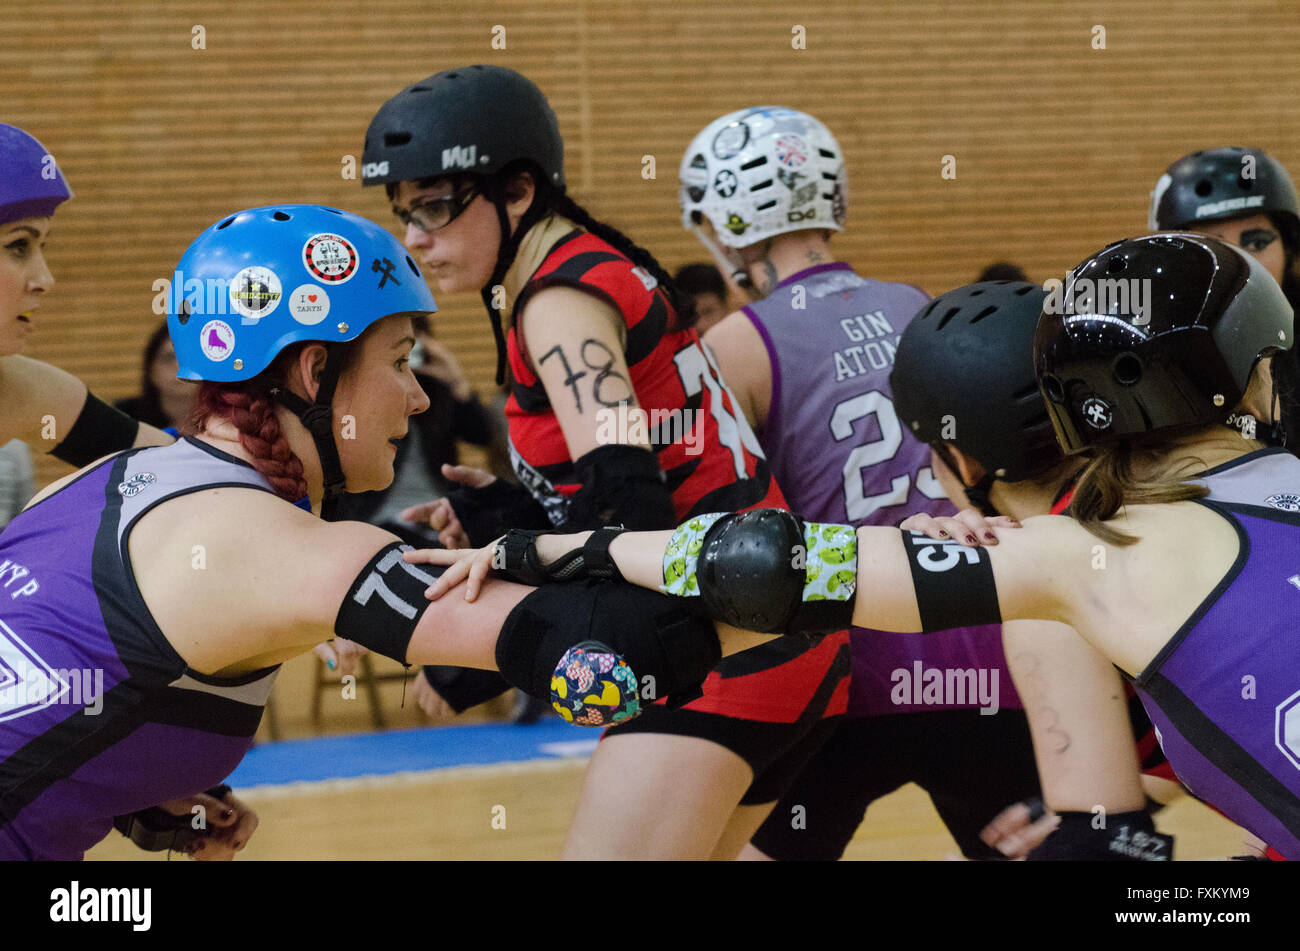 Madrid, Spain. 16th April, 2016. Players of Croydon Roller Derby Vice Squad preparing a defensive position by holding their arms. Credit:  Valentin Sama-Rojo/Alamy Live News. Stock Photo